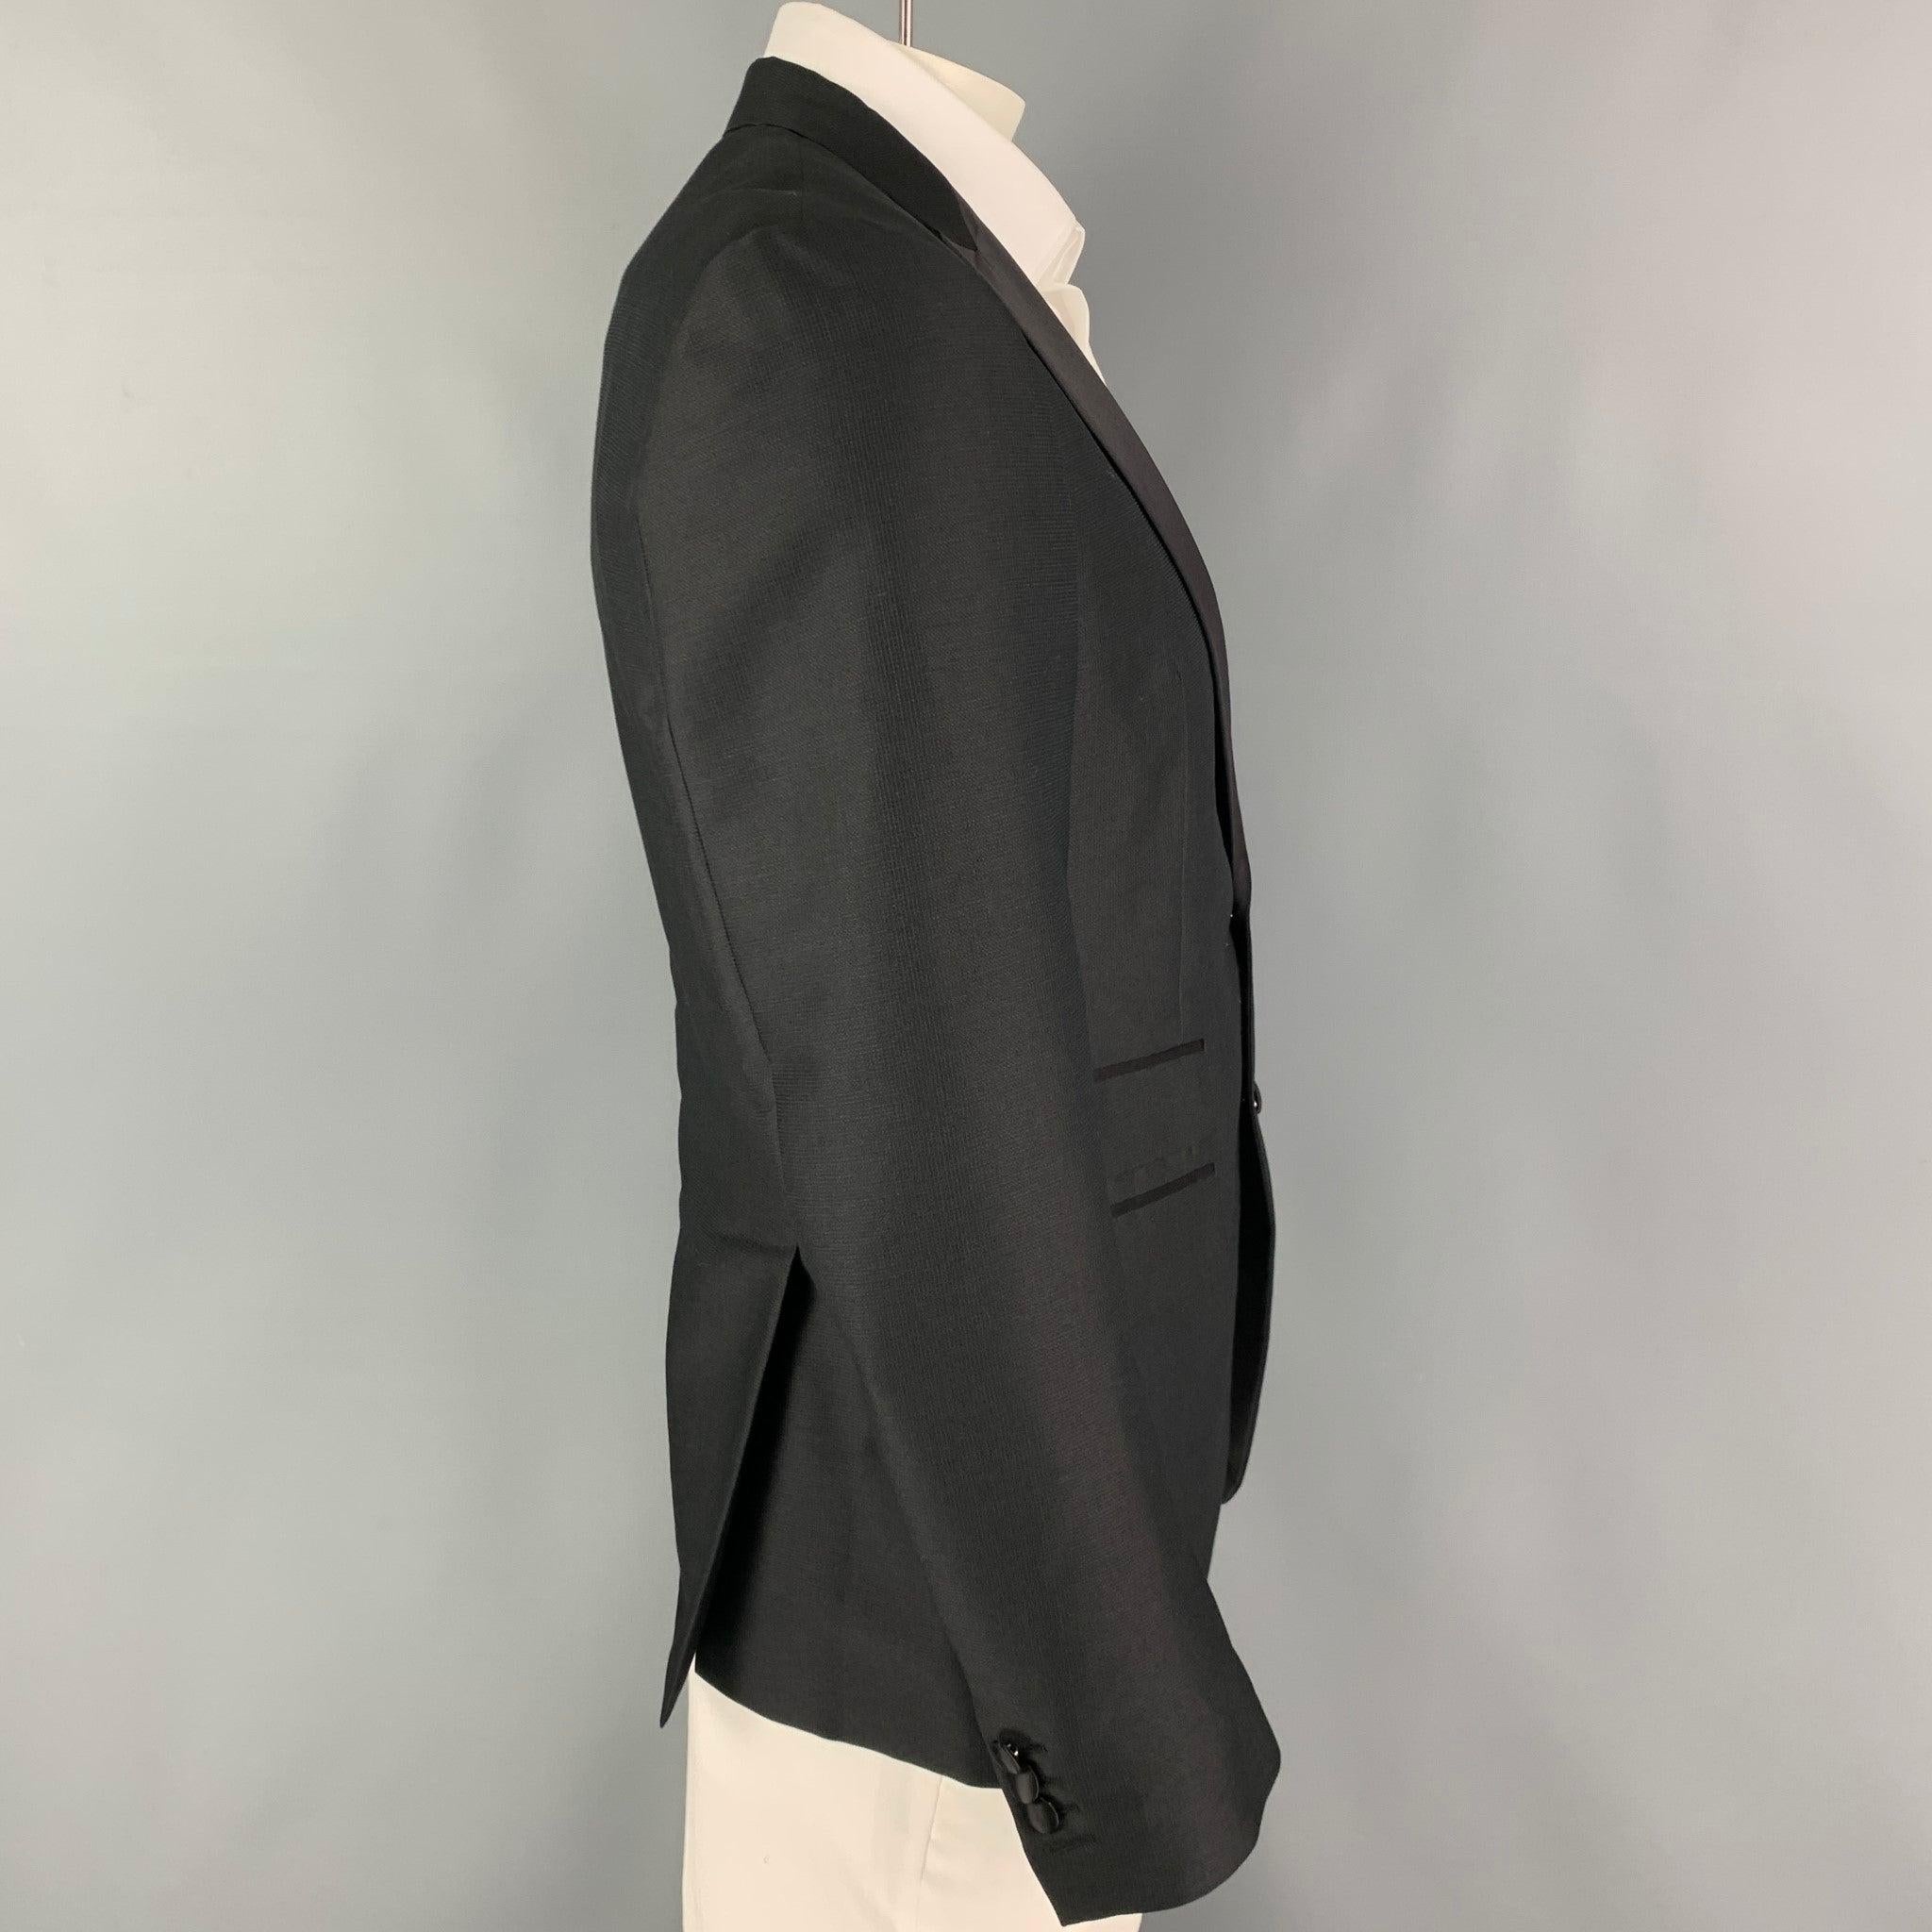 DSQUARED2 sport coat comes in a black nailhead mohair blend with a half liner featuring a peak lapel, flap pockets, double back vent, and a double button closure. Made in Italy.
Excellent
Pre-Owned Condition. 

Marked:   52 

Measurements: 
